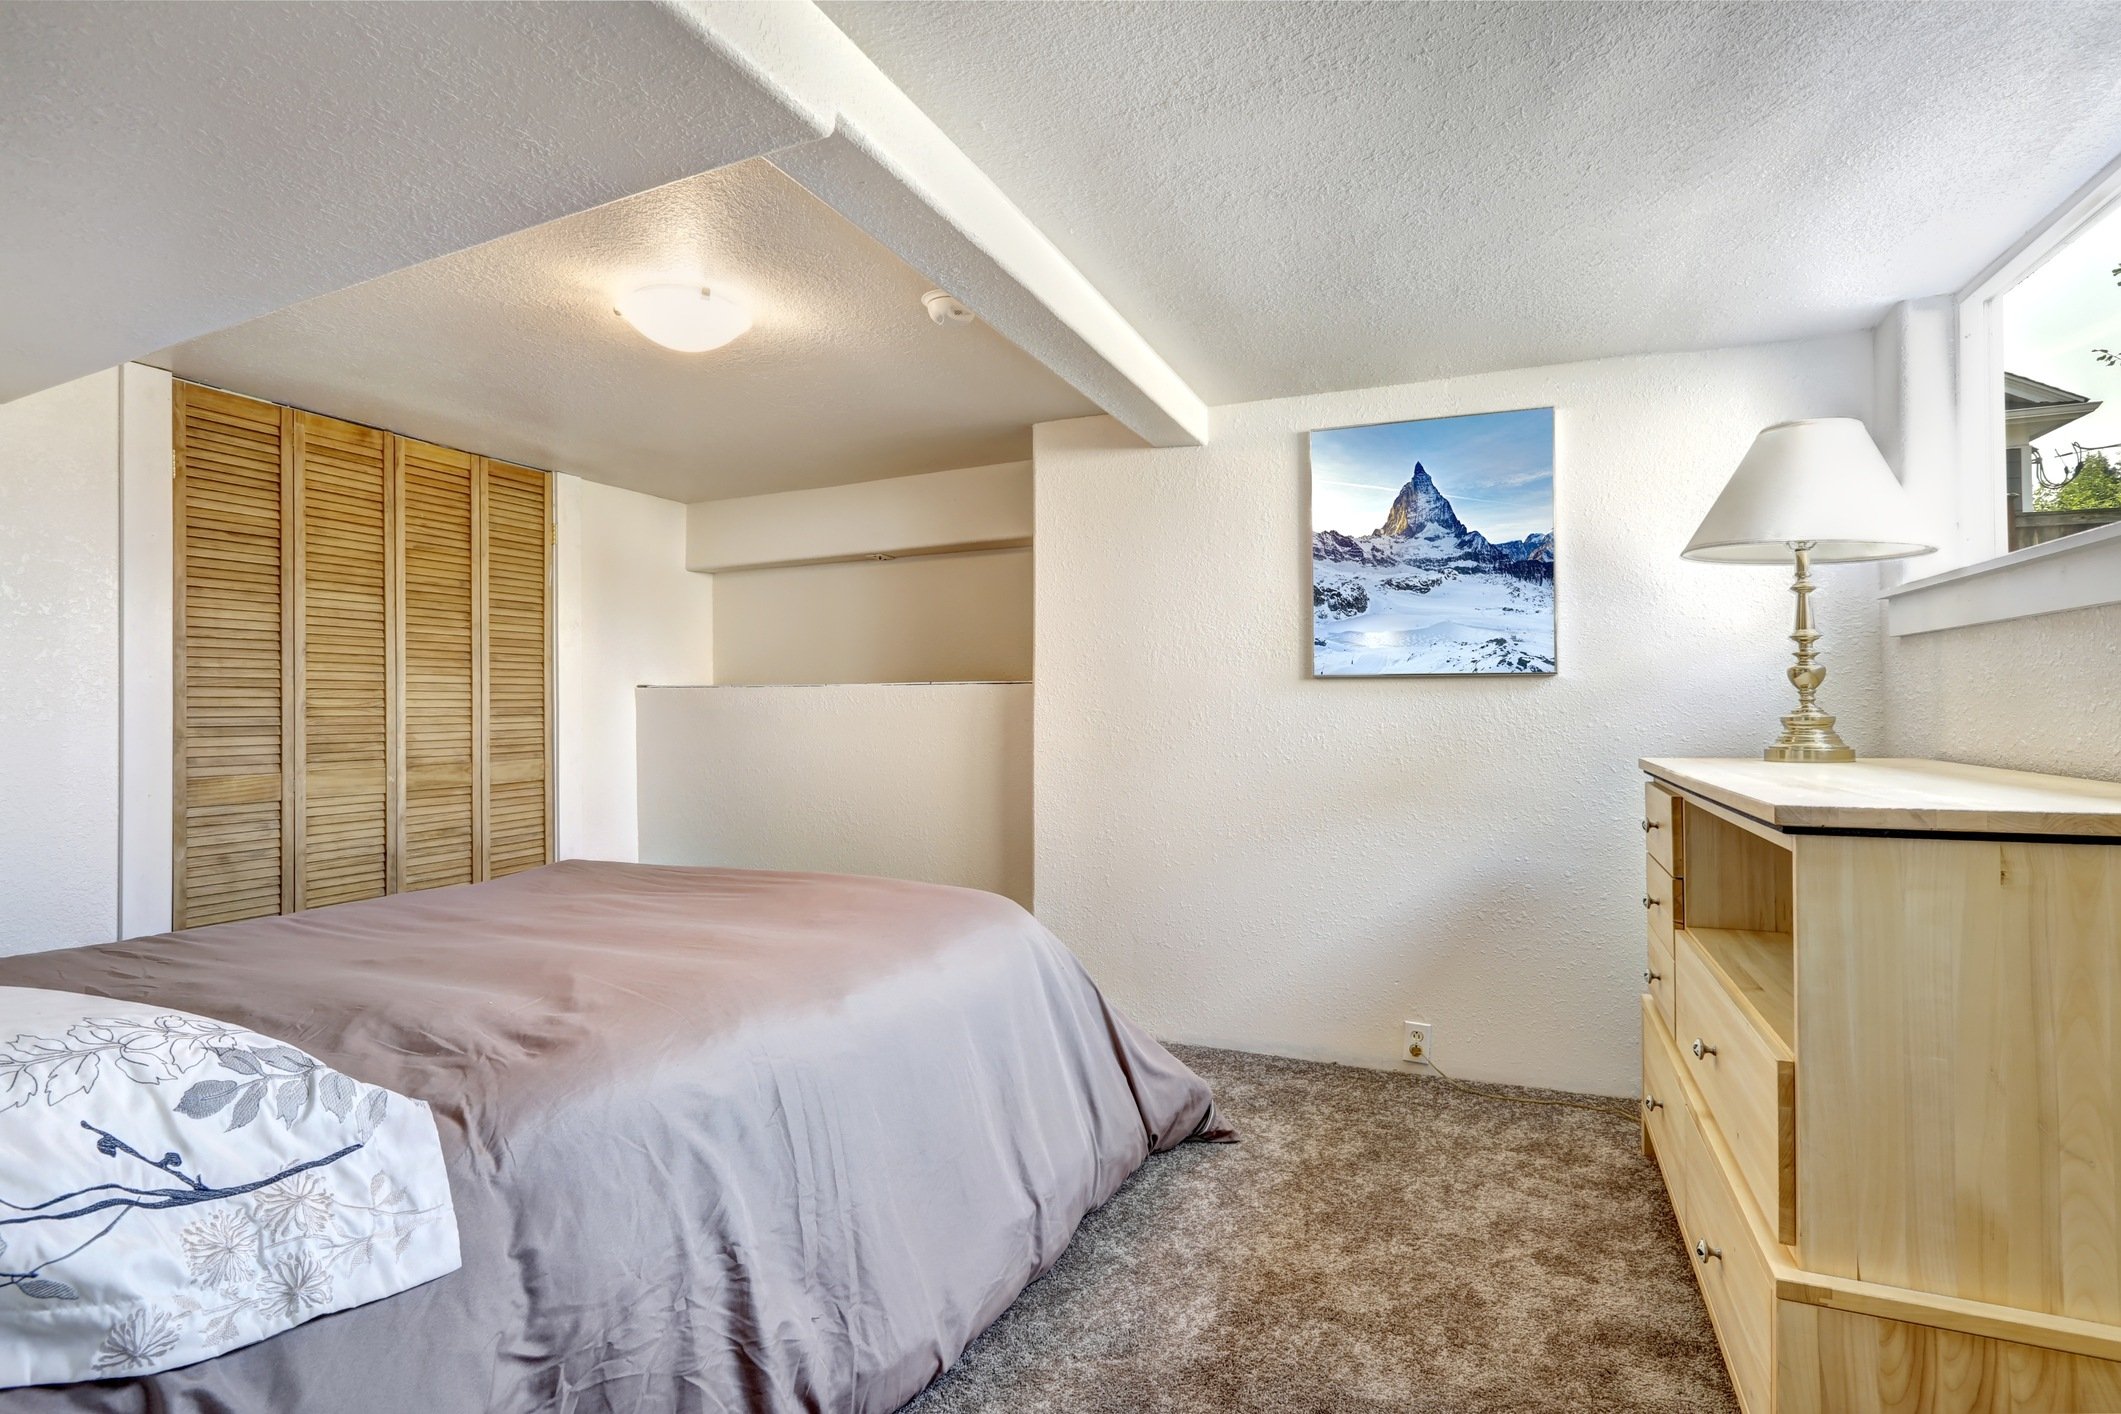 Bedroom with low ceilings and carper